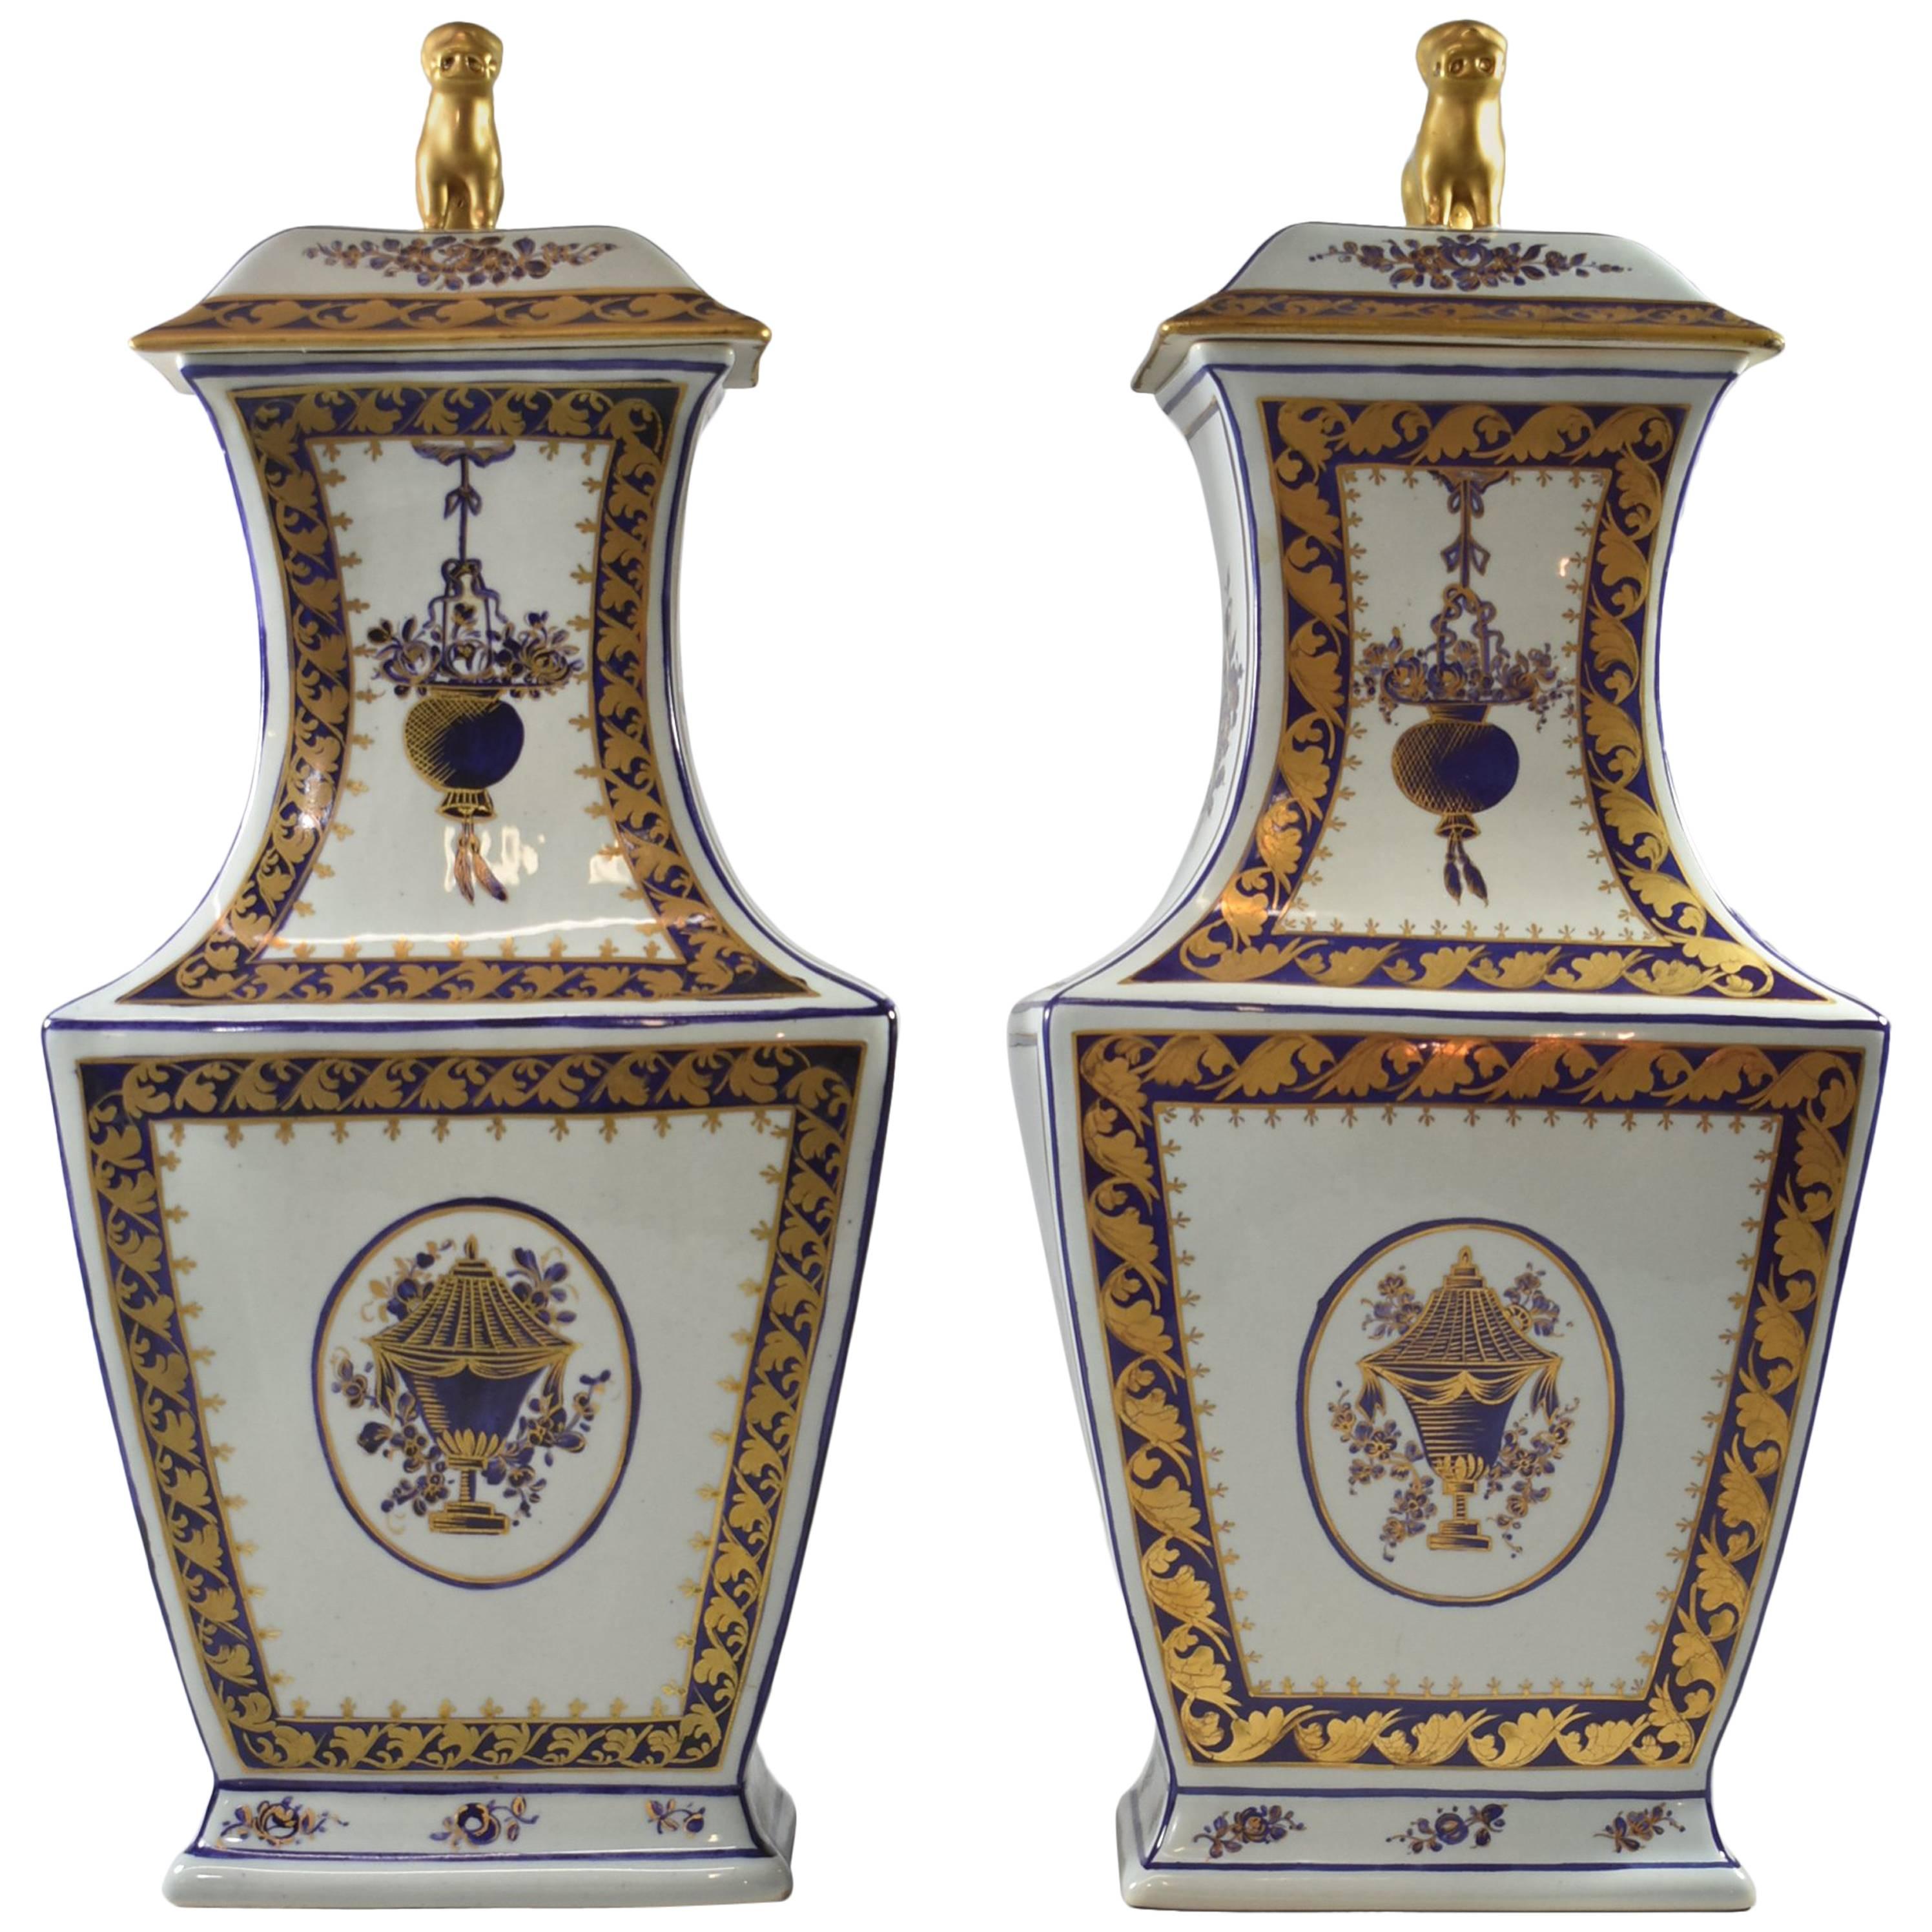 Tall Golden Foo Dog Covered Vases/Urns by Mottahedeh Reproduction Lowestoft Pair